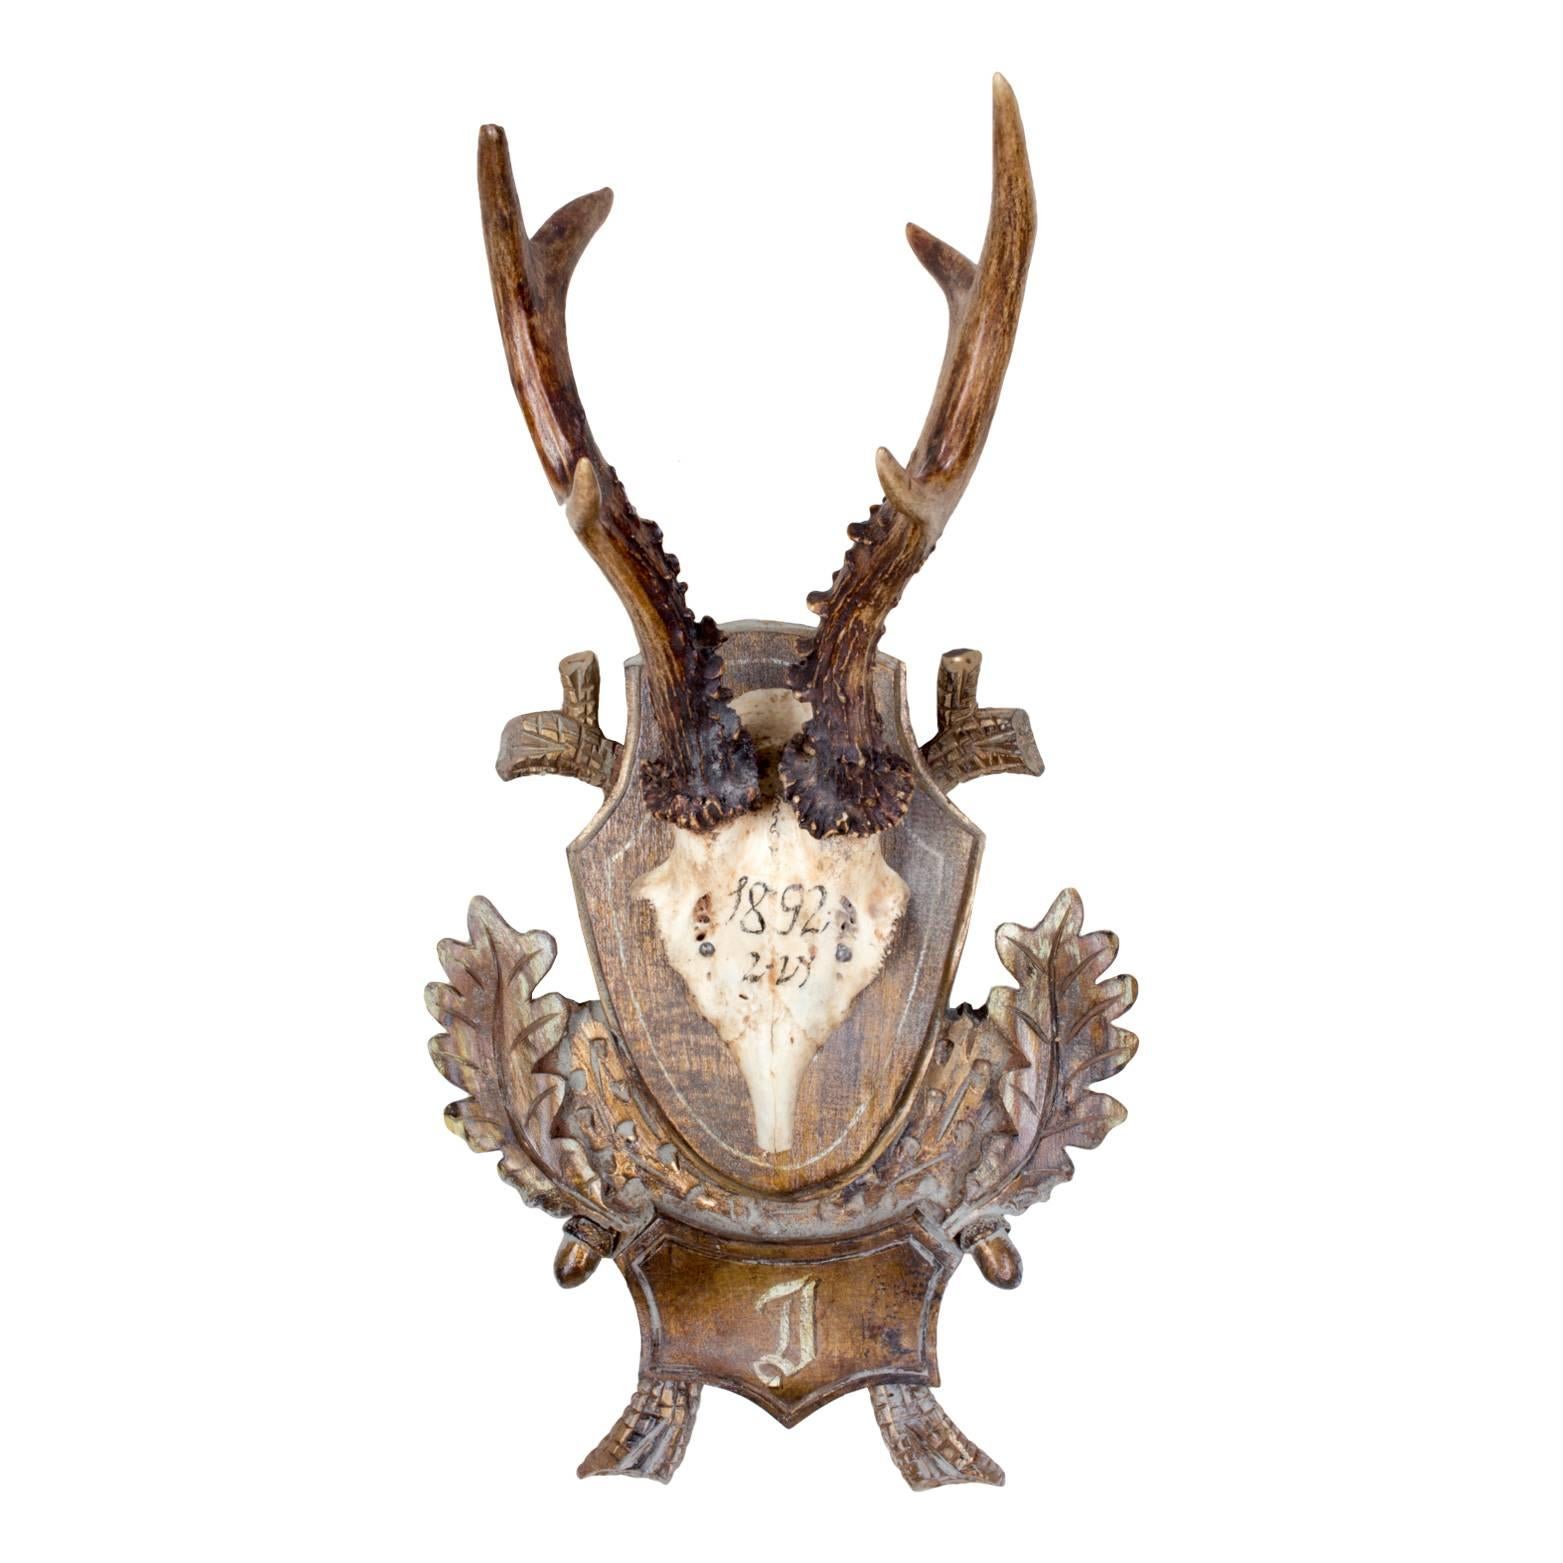 19th century Roe Deer trophies believed to have been taken by Emperor Franz Josef during his time at the Kaiservilla, the summer palace of the great Austro-Hungarian monarchy in the small village of Bad Ischl, Austria. Original plaque and initial